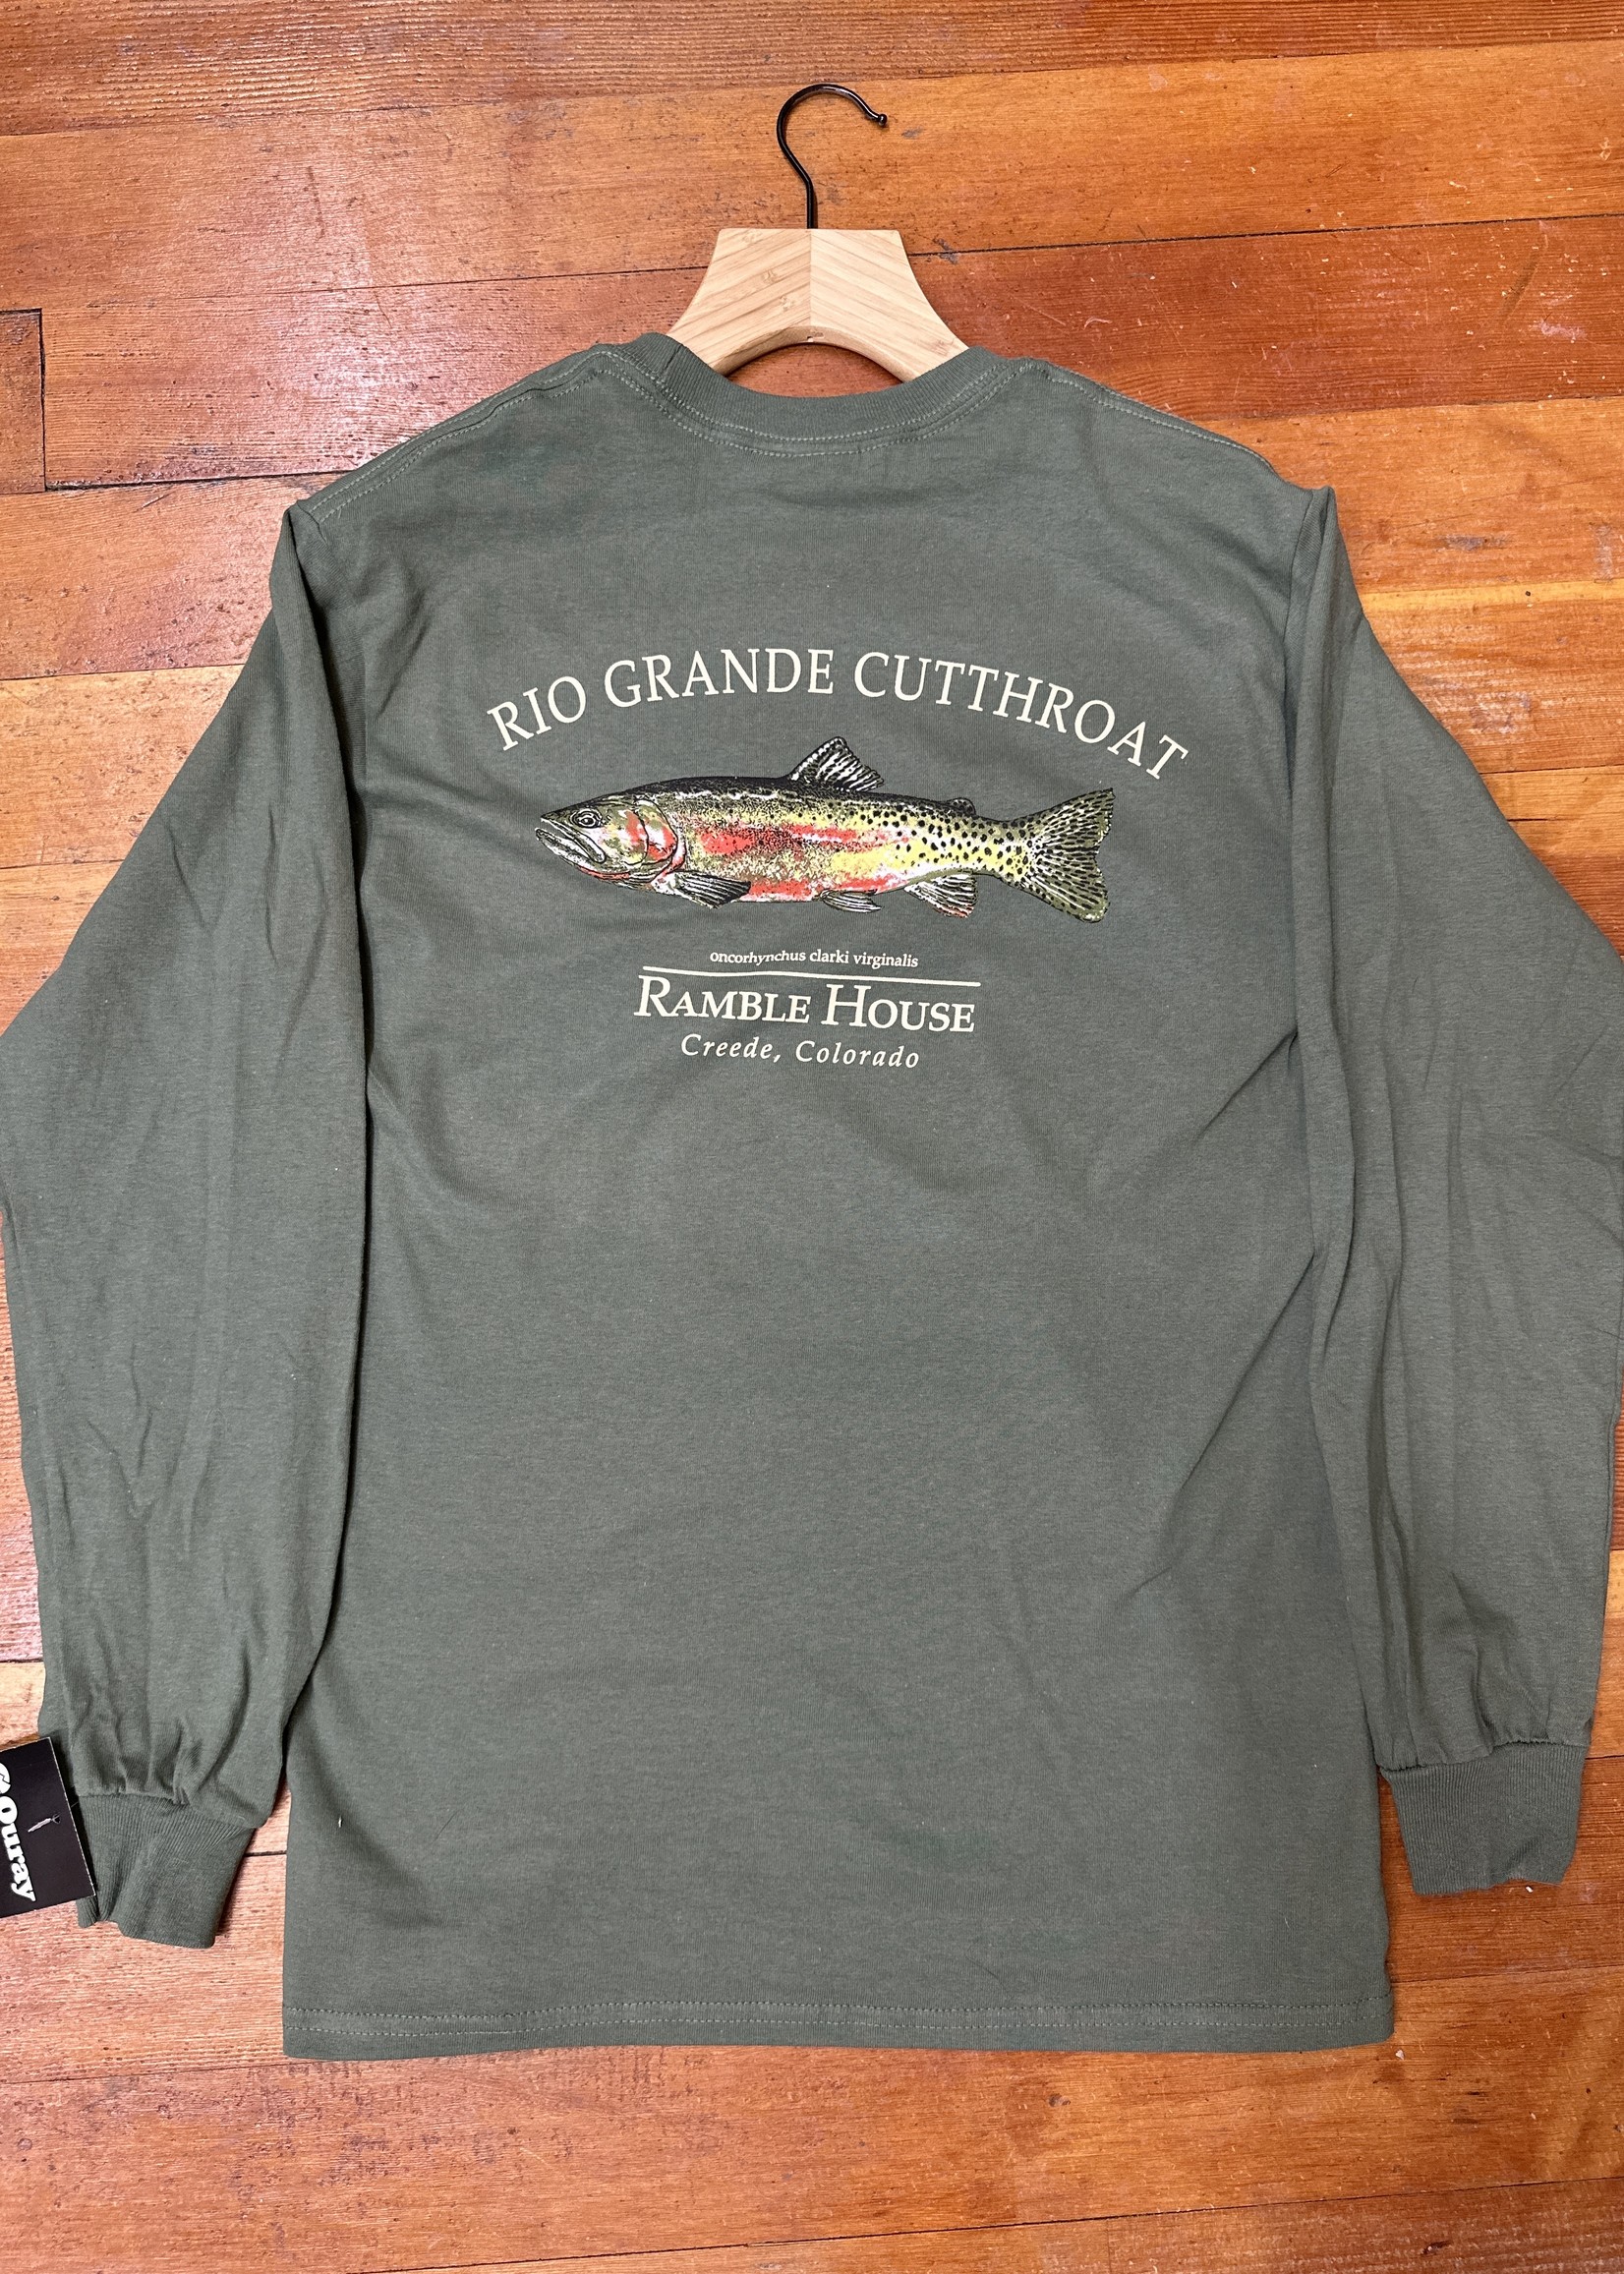 Ouray Ouray L/S T Military Green Ramble House/Rio Grande Cutthroat